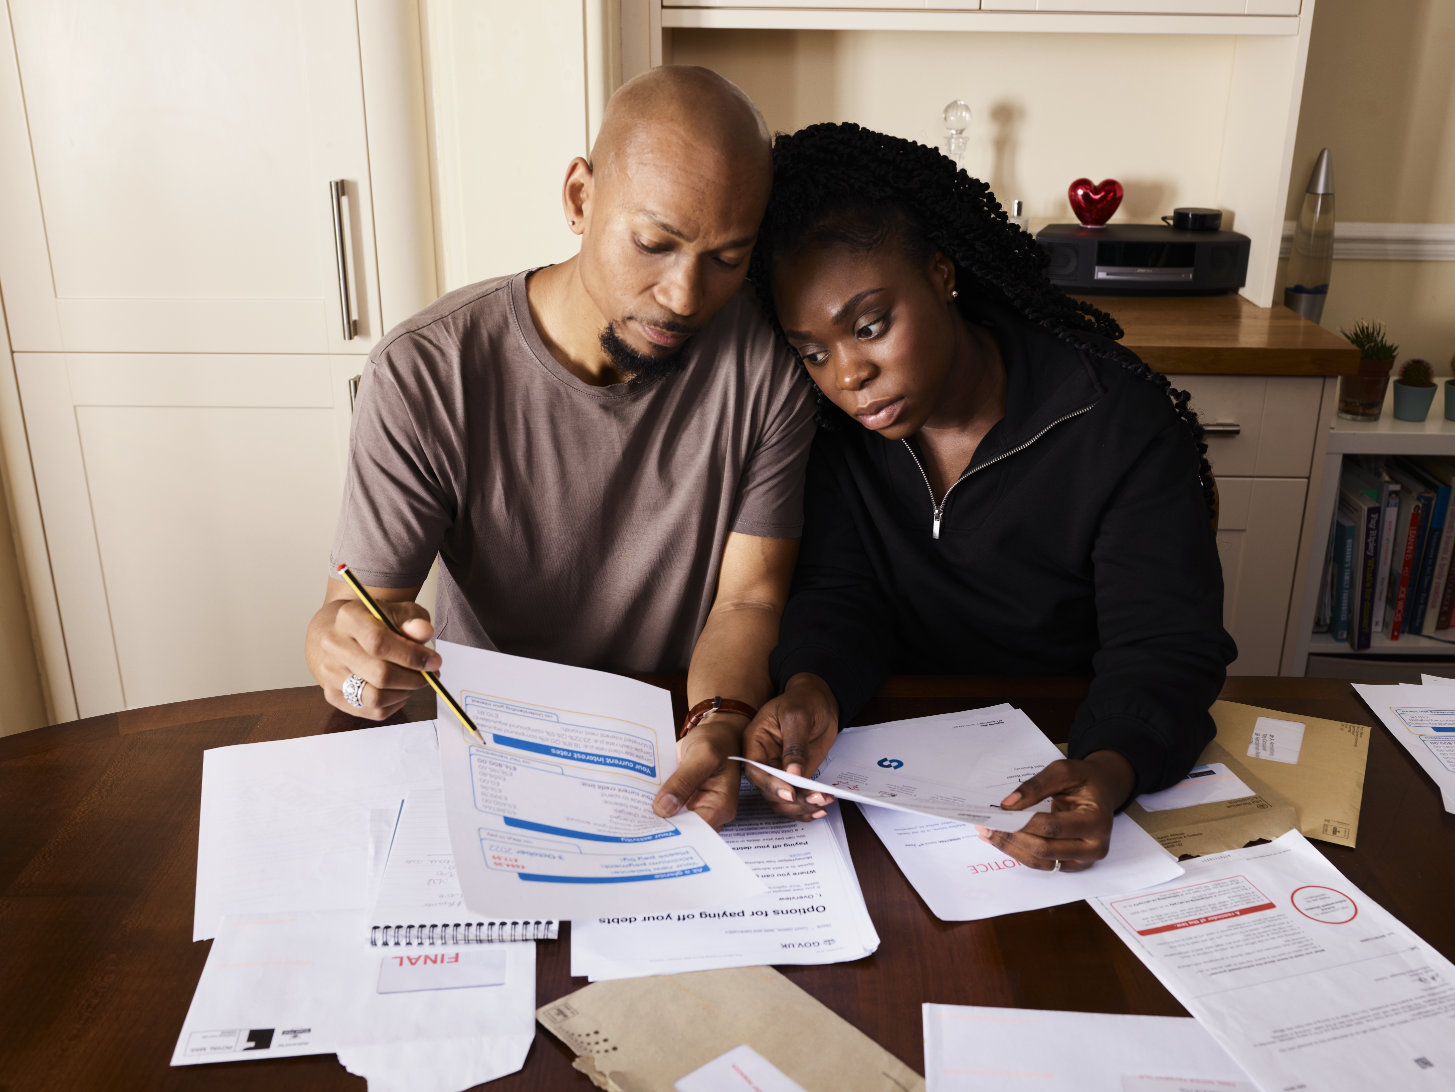 Young couple going through bills at kitchen table